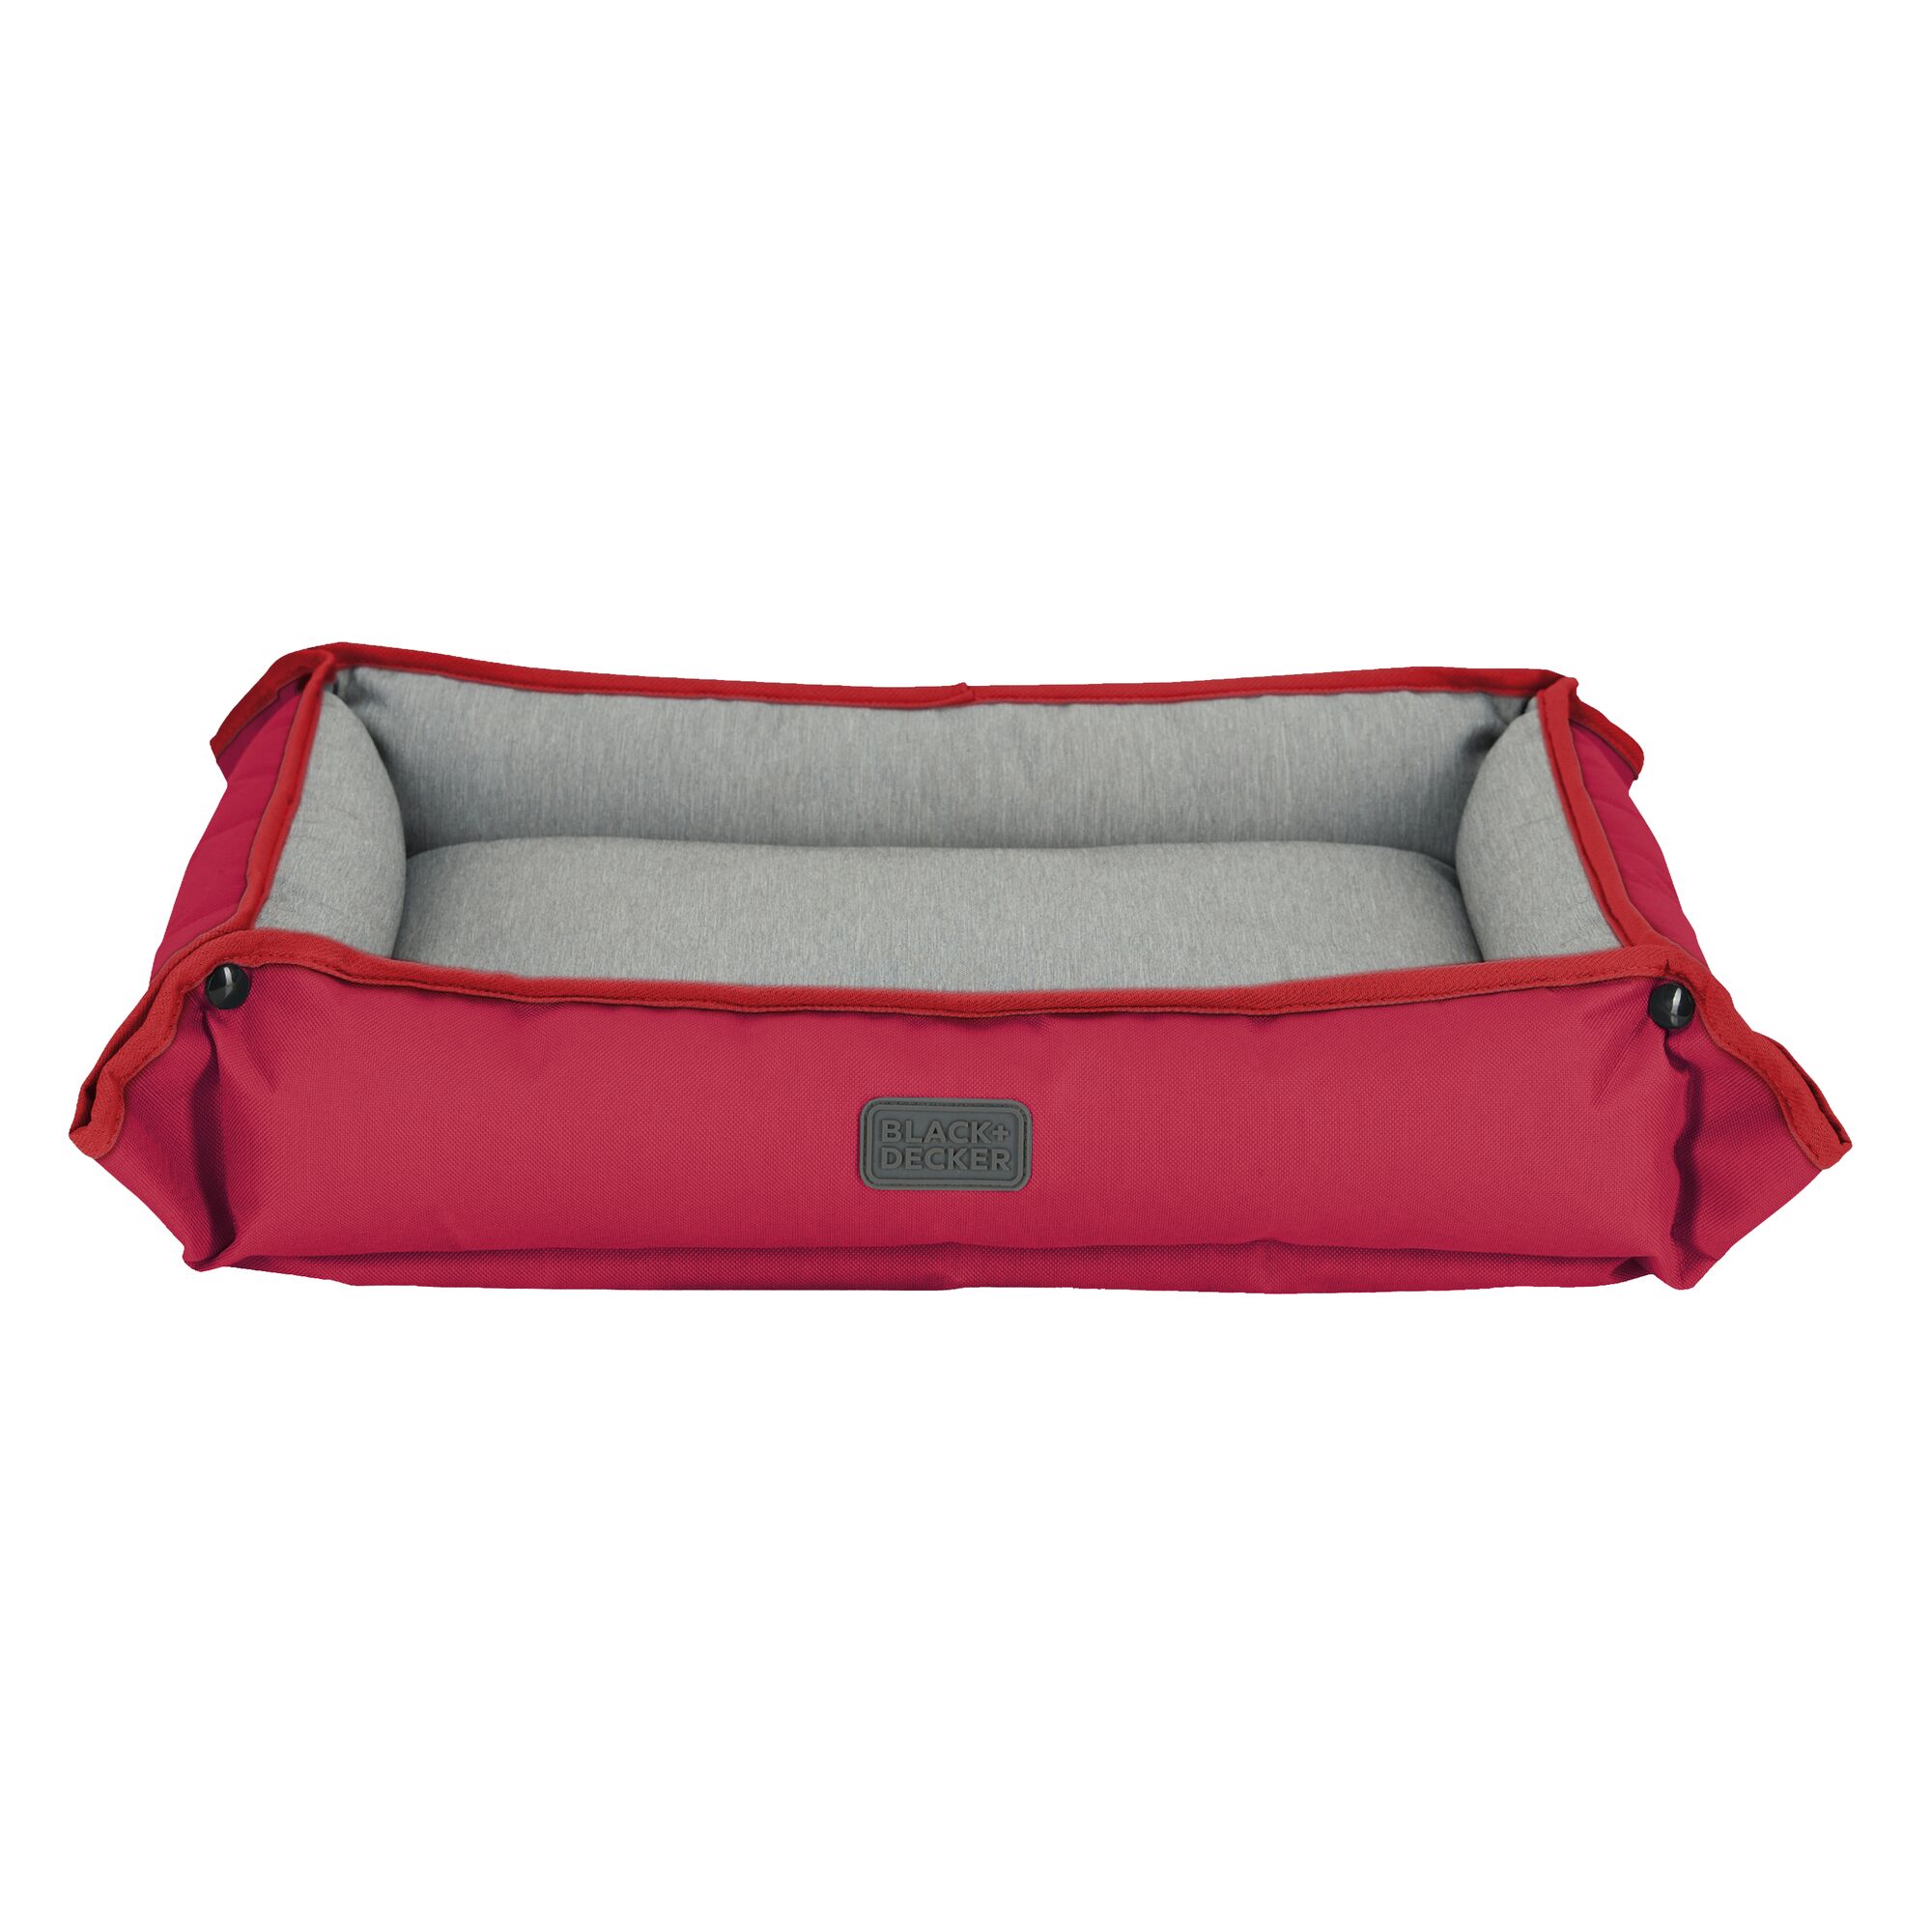 Hero image of the four way BLACK+DECKER pet bed in a bright color